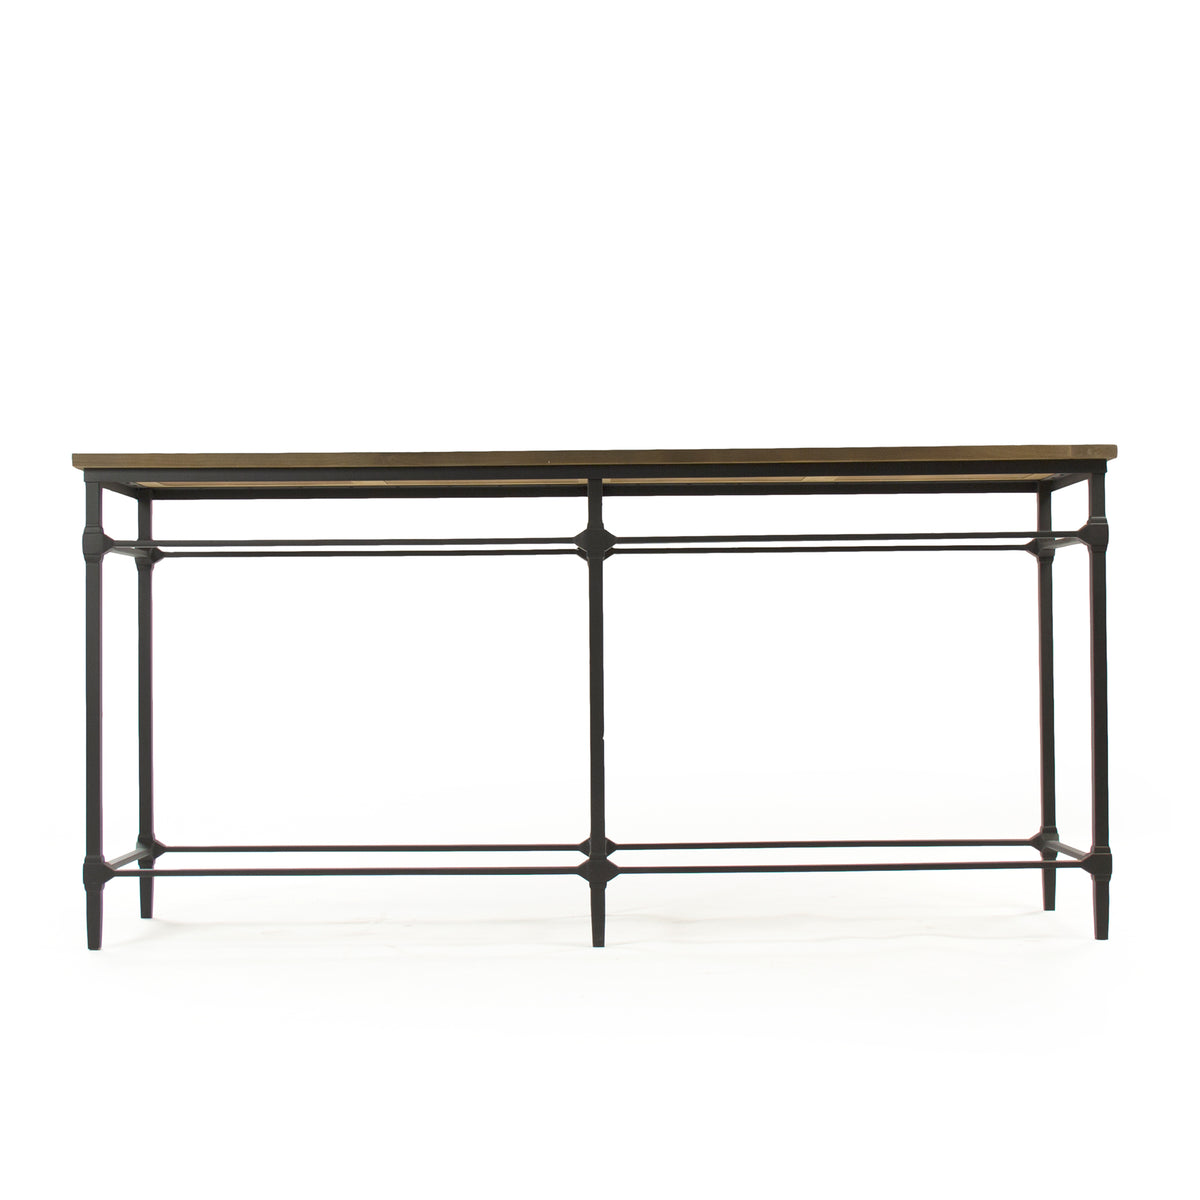 Aveline Console by Zentique